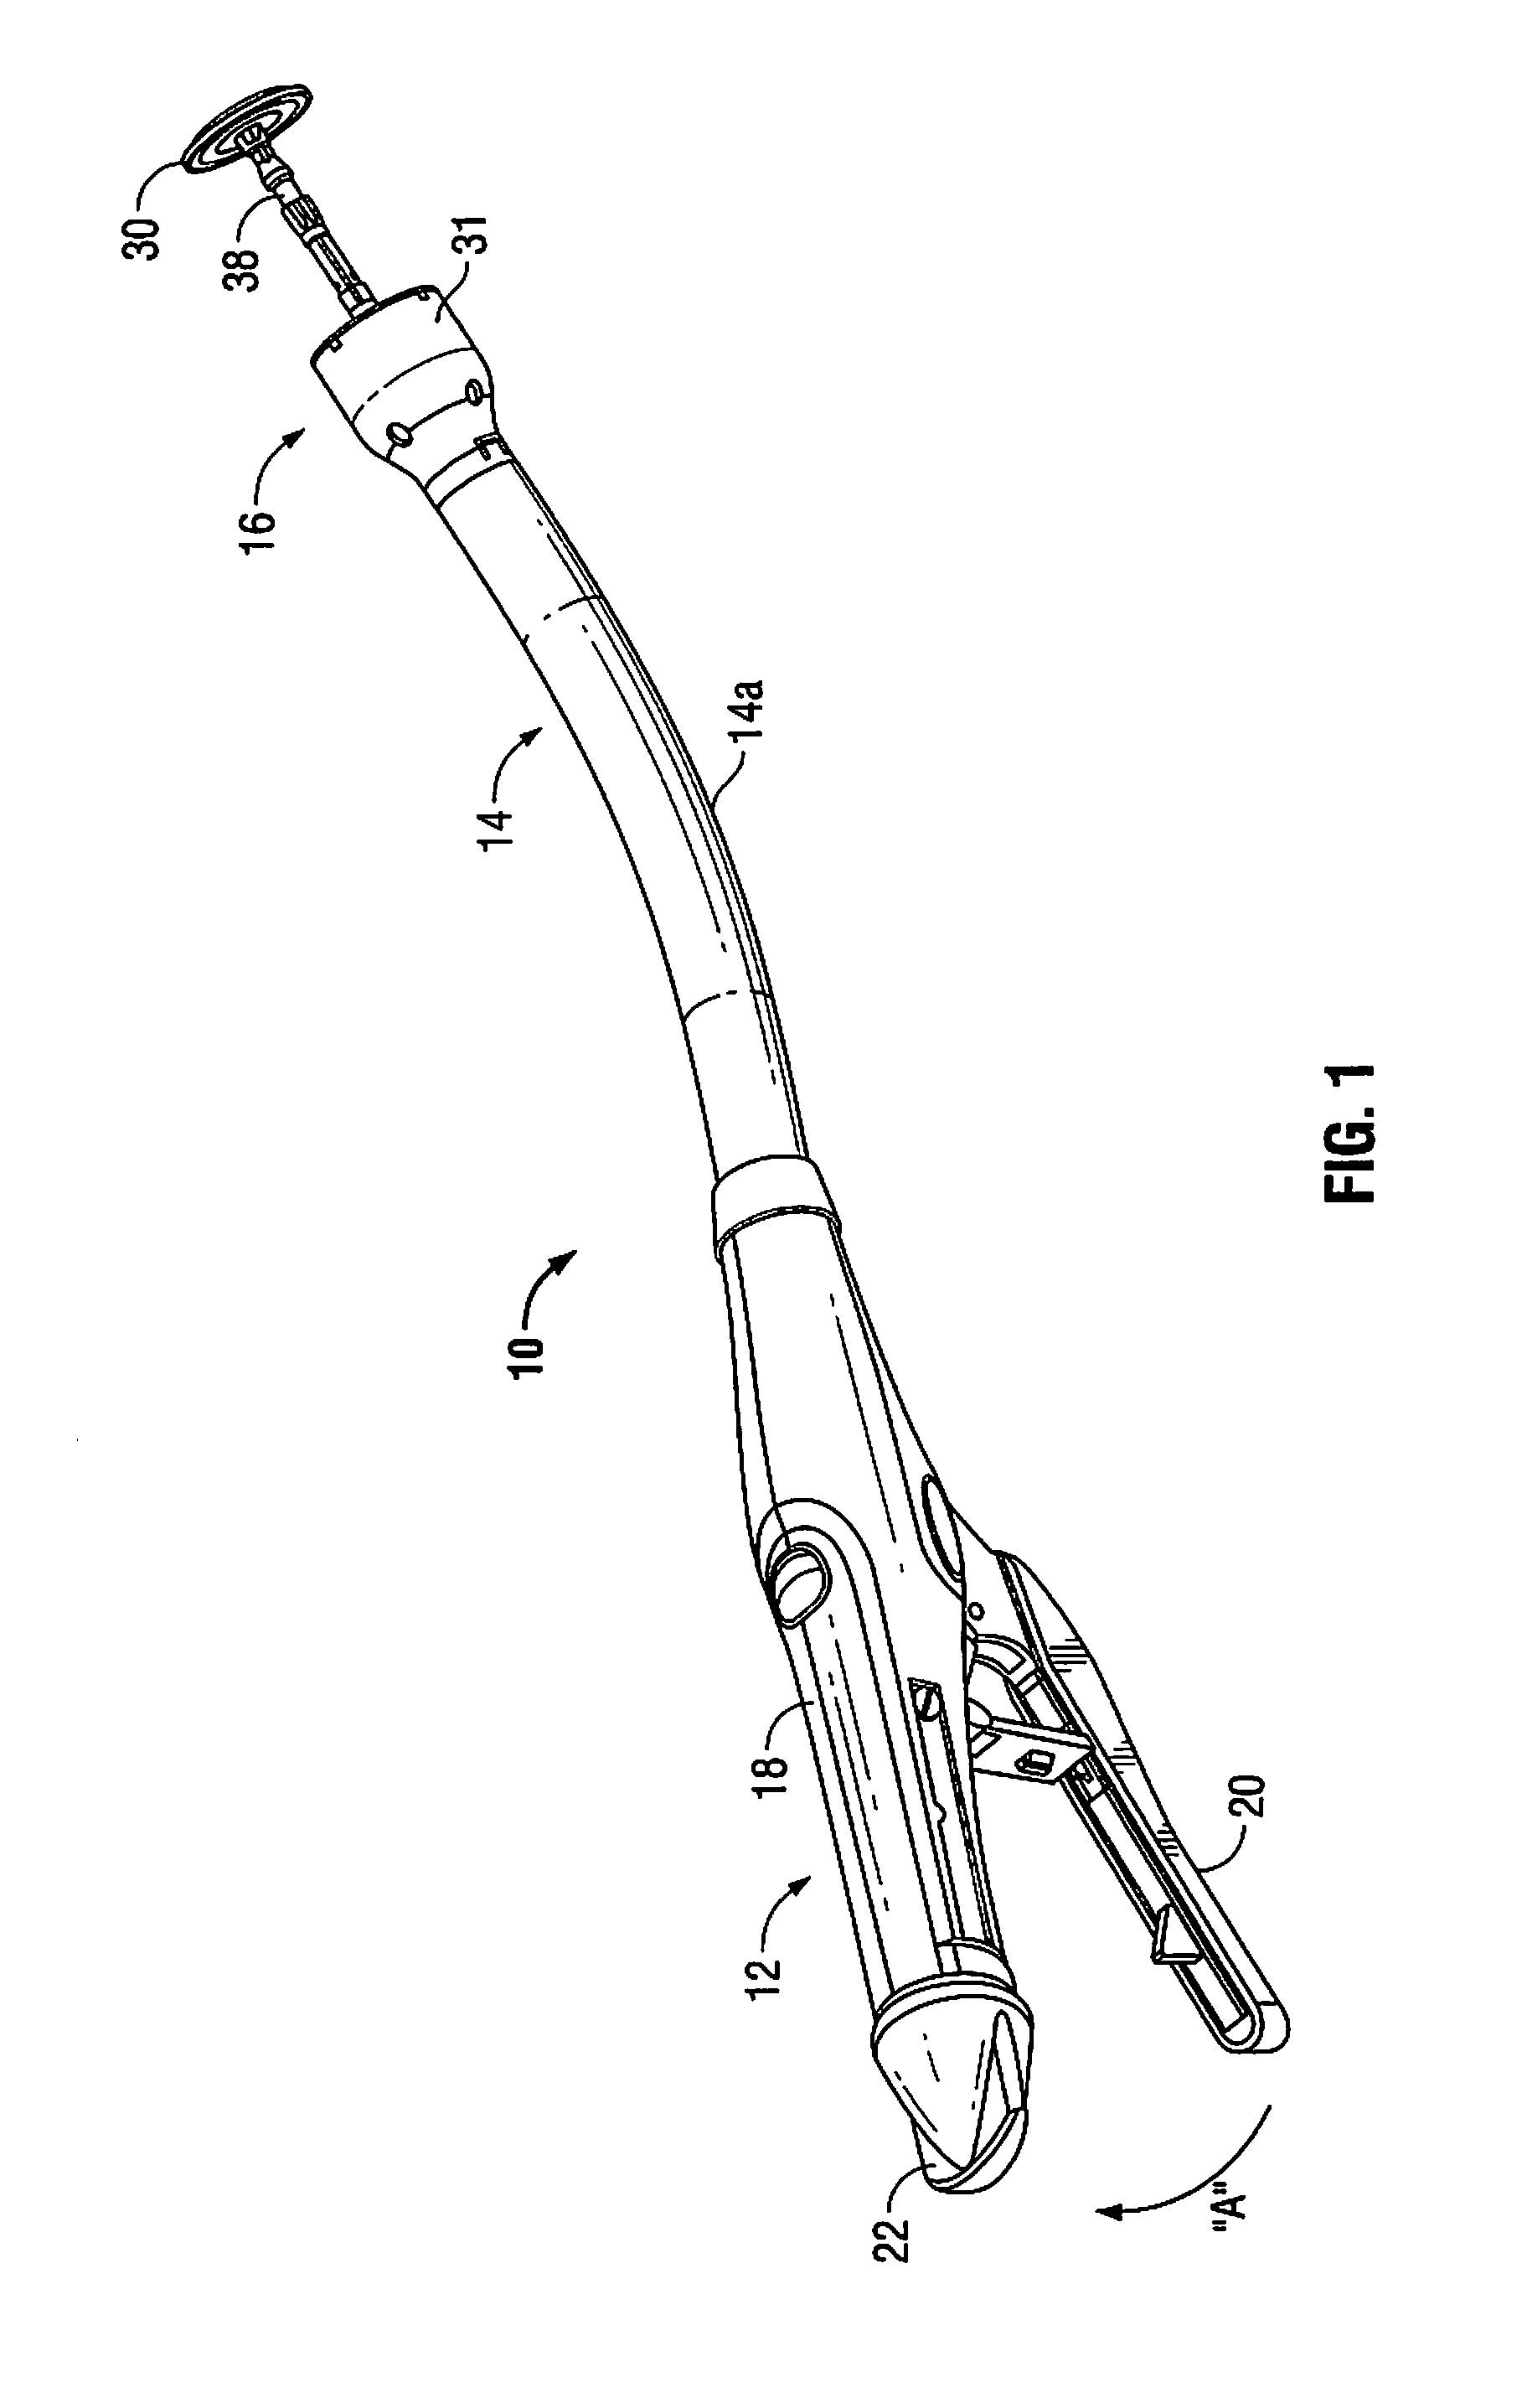 Surgical instrument with safety mechanism